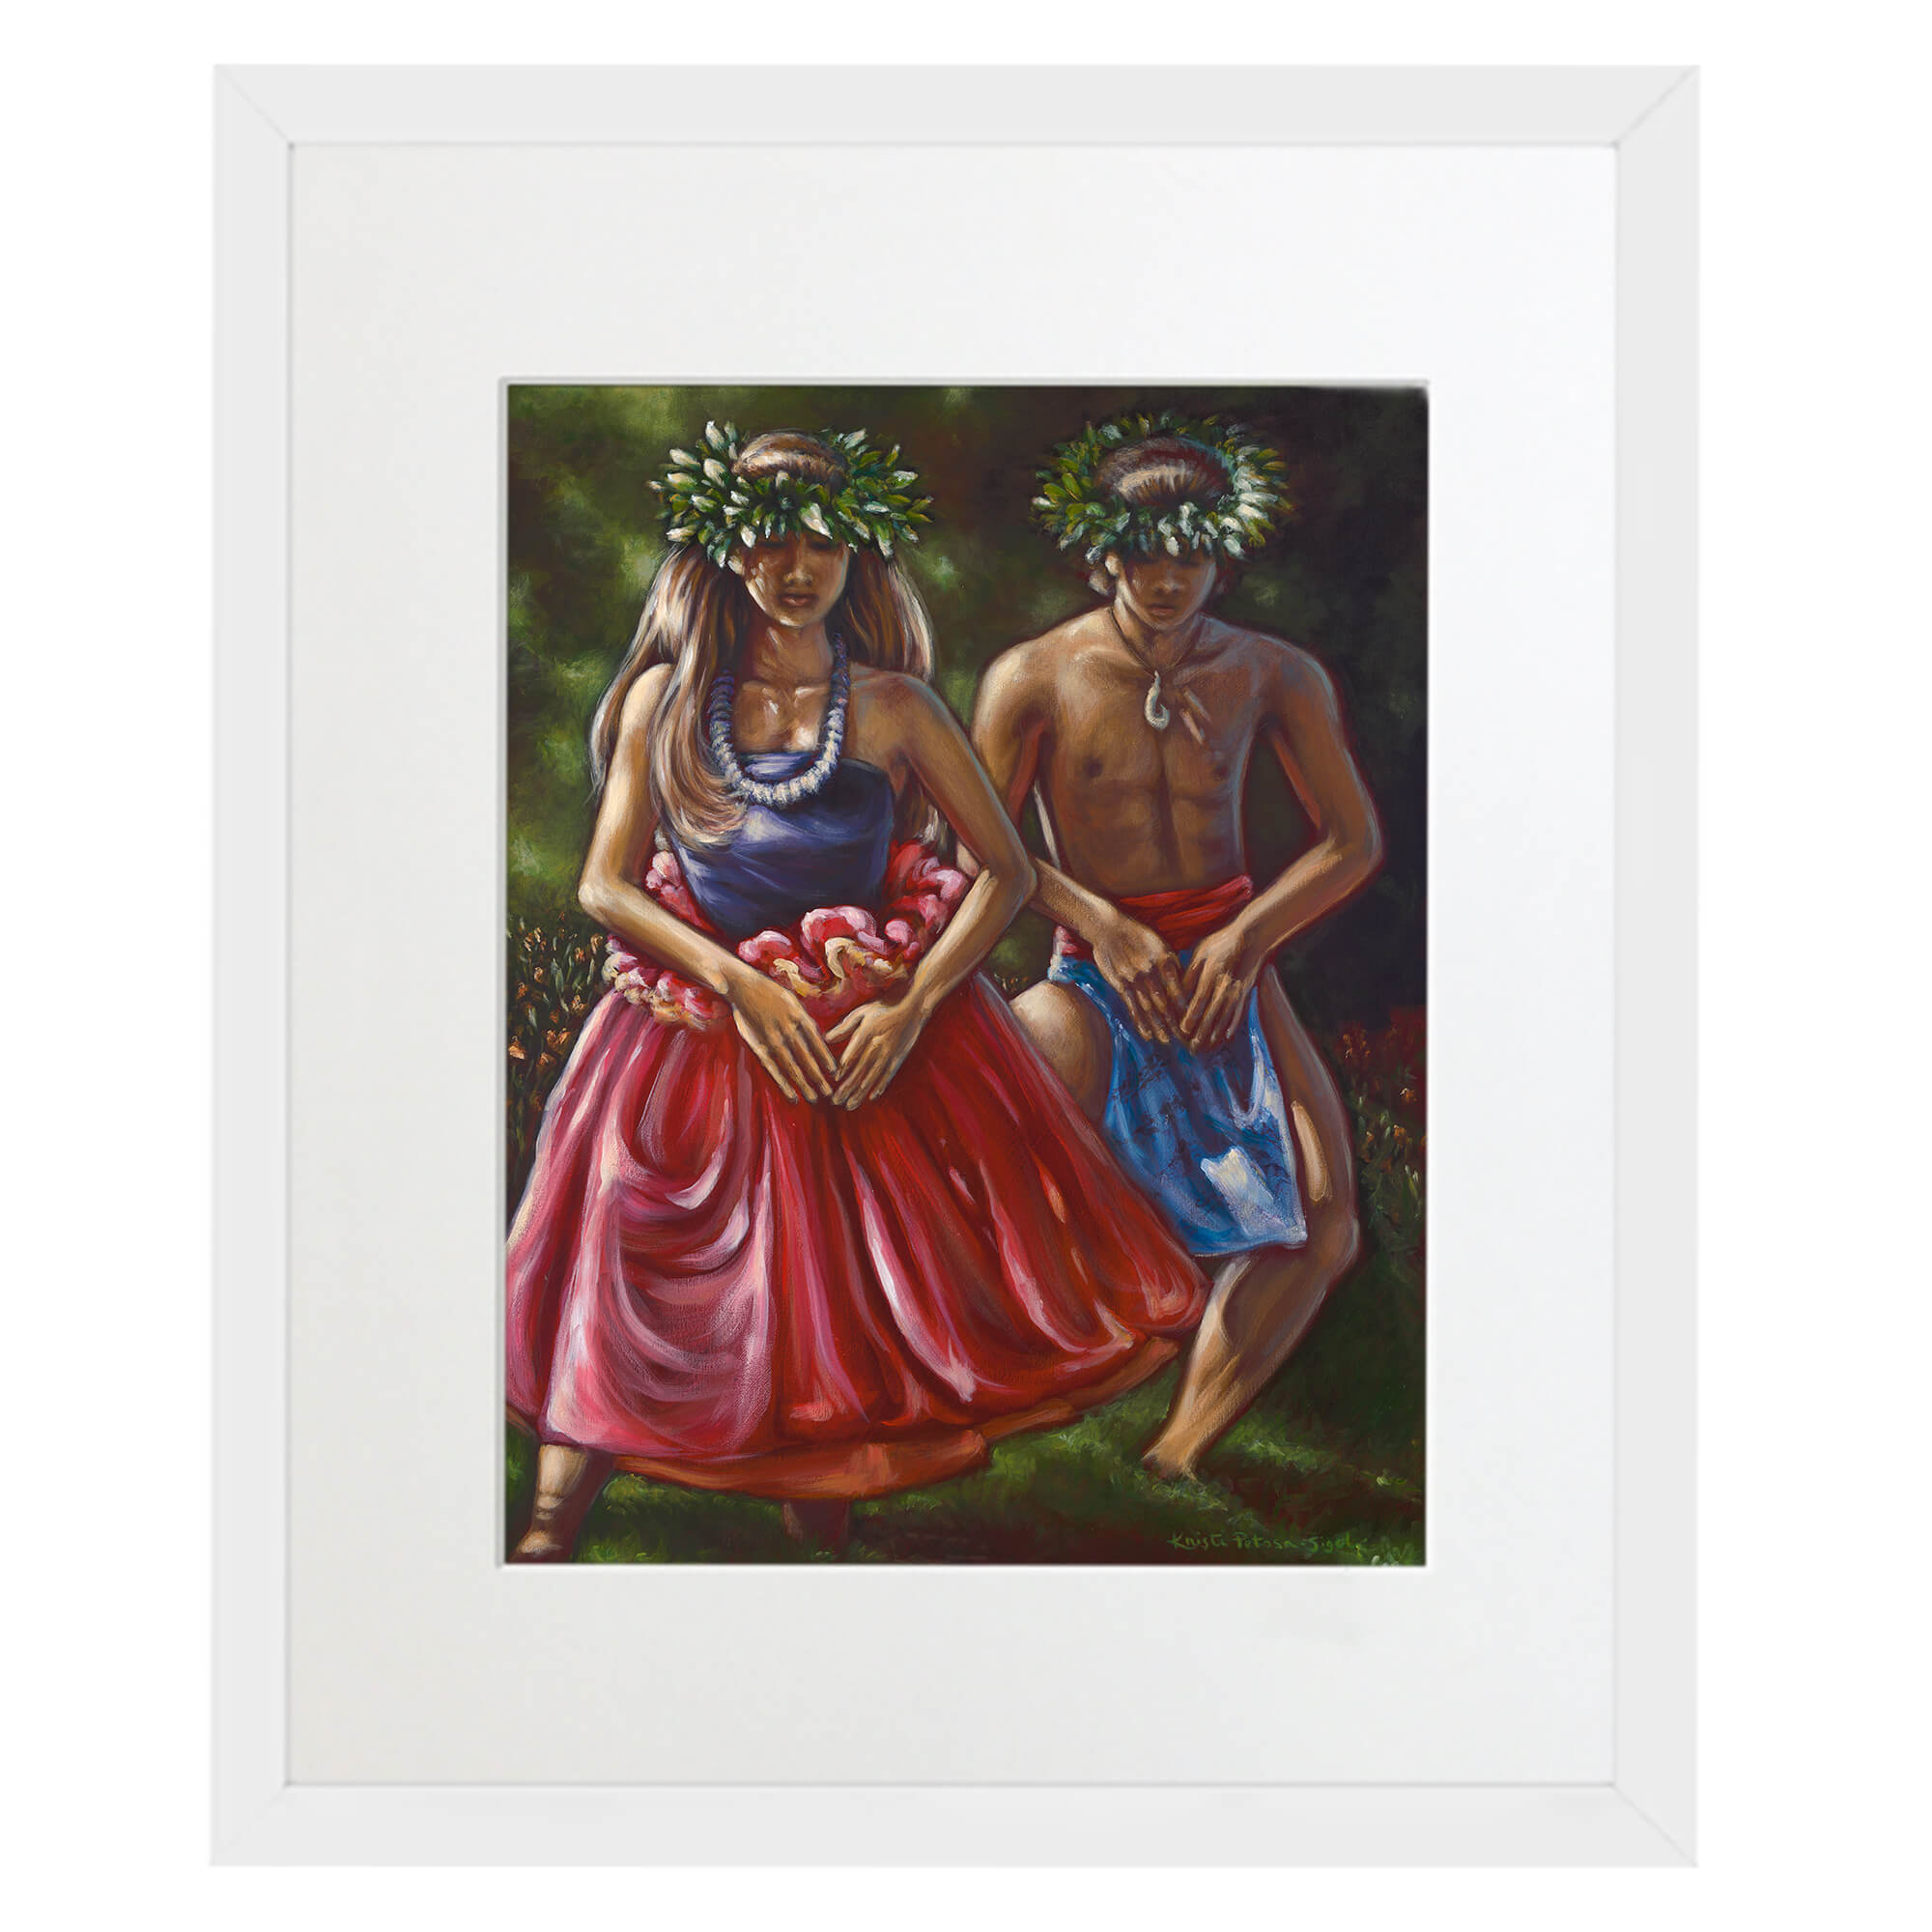 Matted art print with white frame featuring  a woman wearing a purple top  by hawaii artist Kristi Petosa